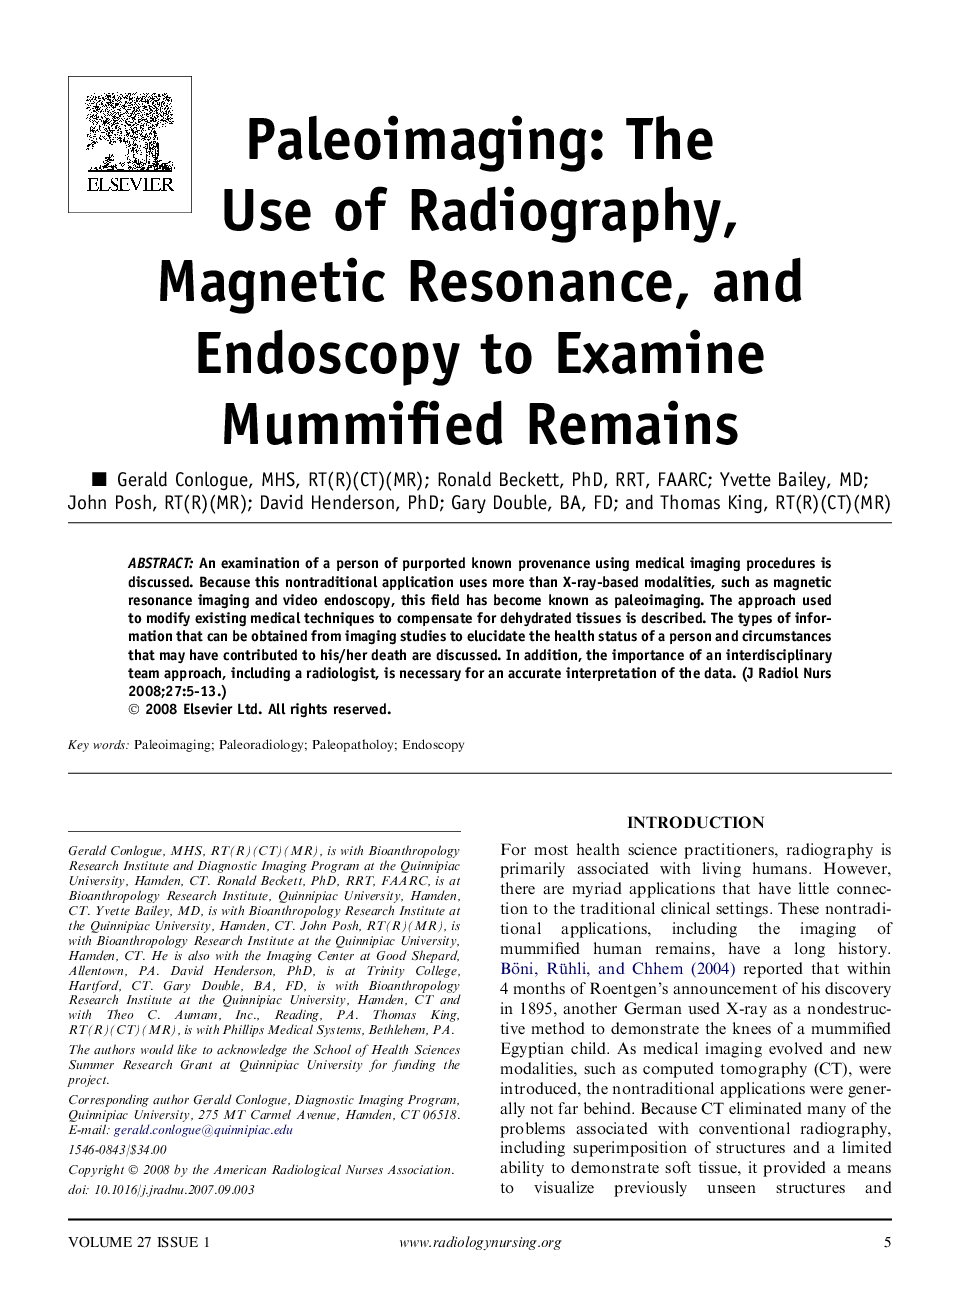 Paleoimaging: The Use of Radiography, Magnetic Resonance, and Endoscopy to Examine Mummified Remains 